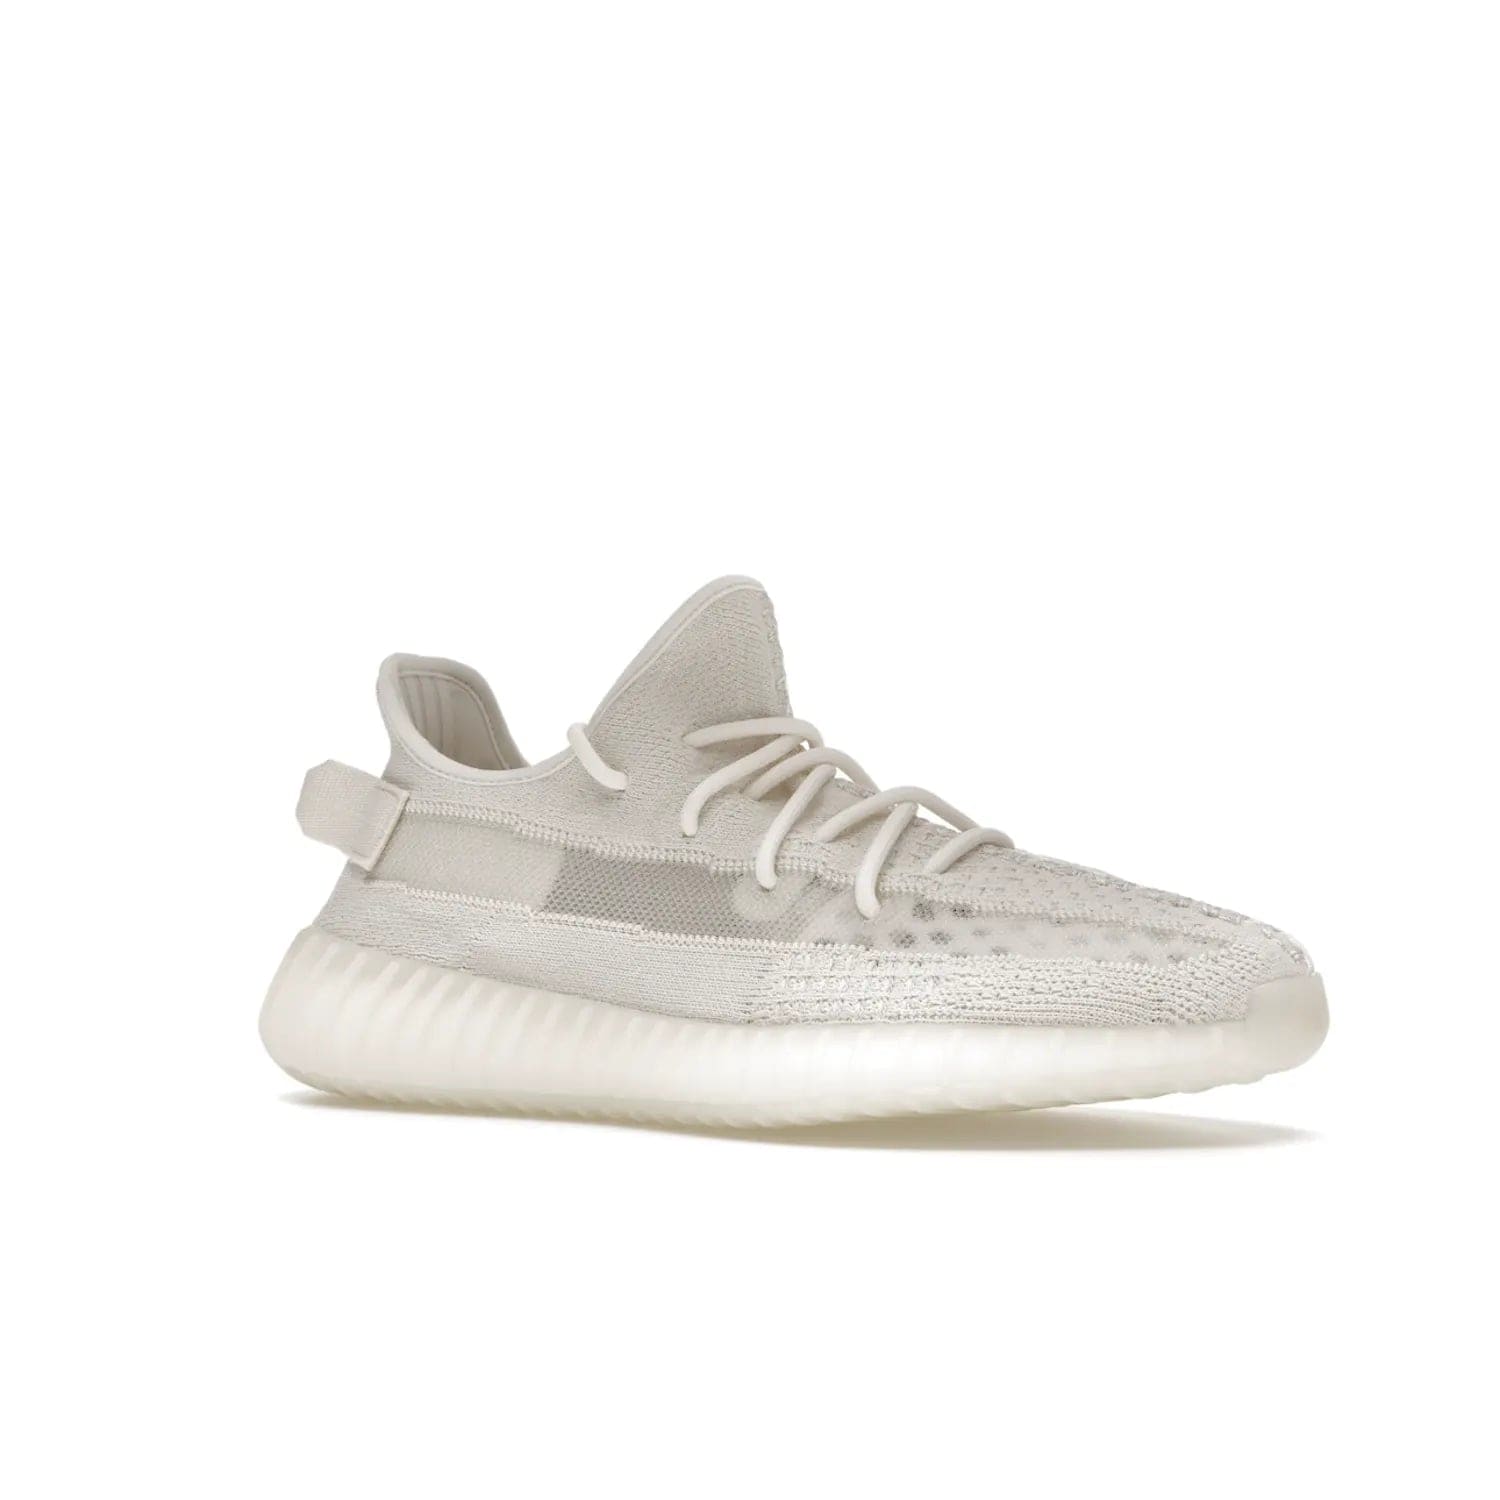 adidas Yeezy Boost 350 V2 Bone - Image 4 - Only at www.BallersClubKickz.com - Grab the stylish and comfortable adidas Yeezy Boost 350 V2 Bone in March 2022. This sneaker features a triple white Primeknit upper, mesh side stripes and canvas heel tabs, sitting atop a semi-translucent sole with Boost technology. Sure to keep your feet comfortable and stylish!